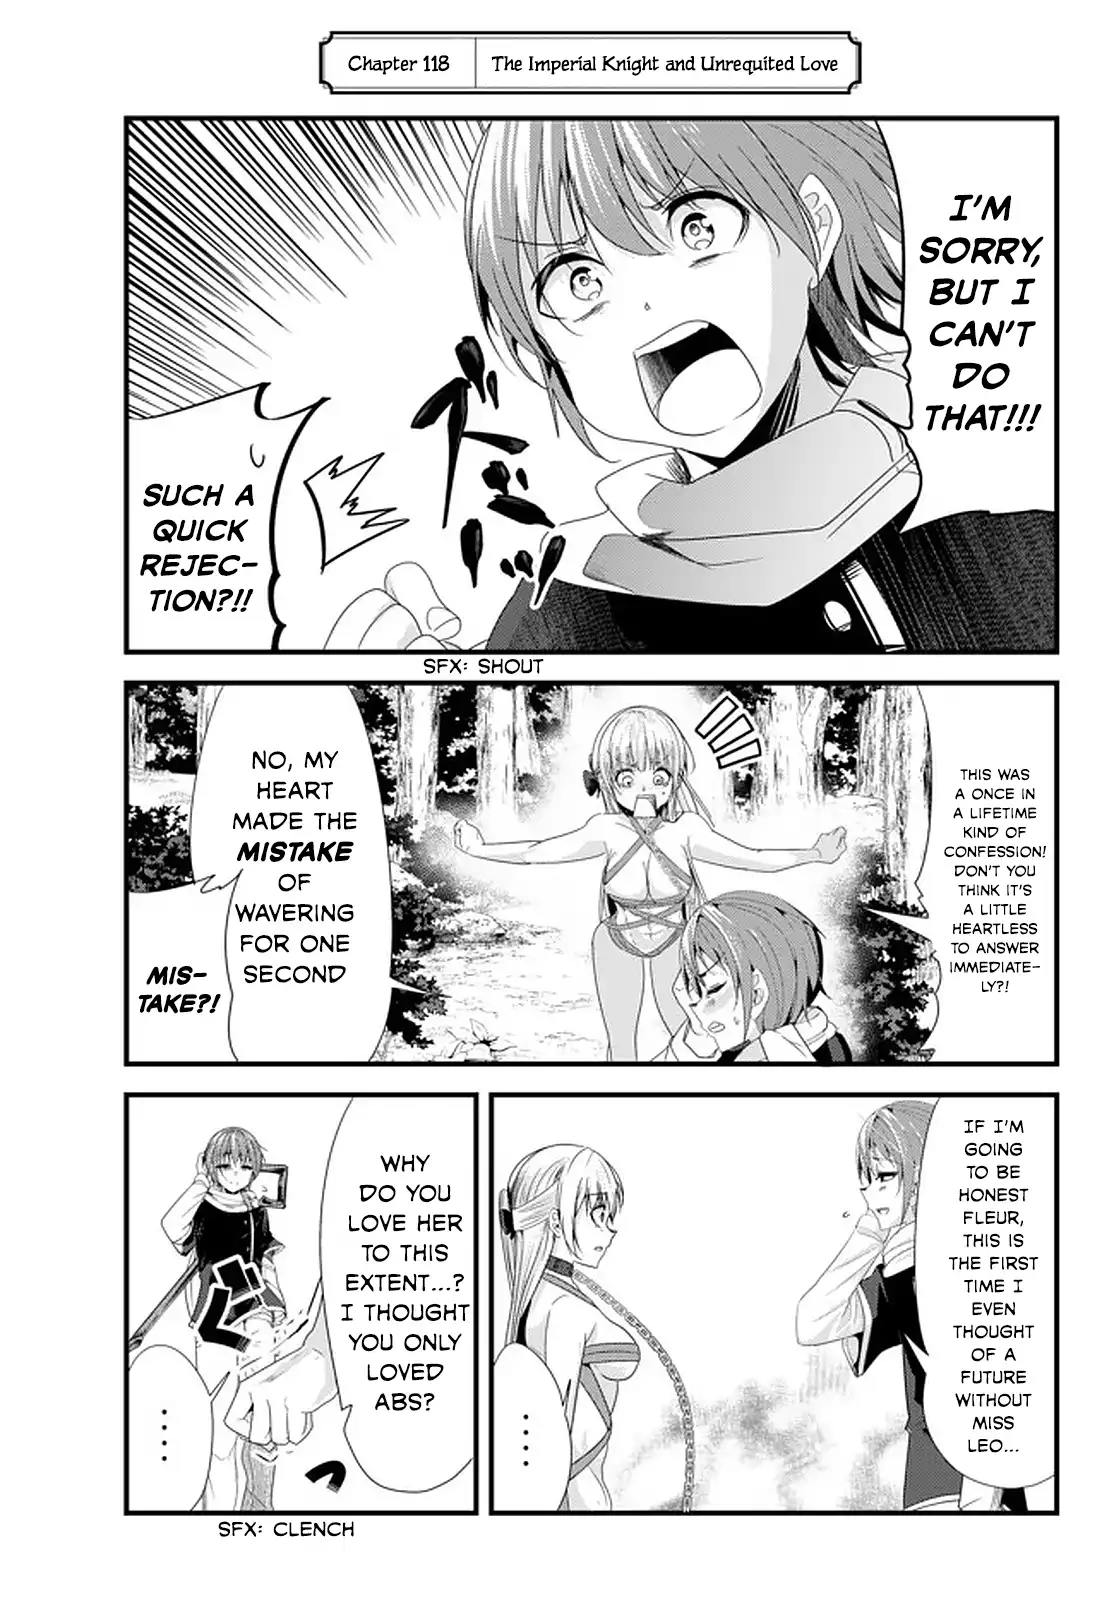 A Story About Treating a Female Knight, Who Has Never Been Treated as a Woman, as a Woman - Chapter 118 Page 1